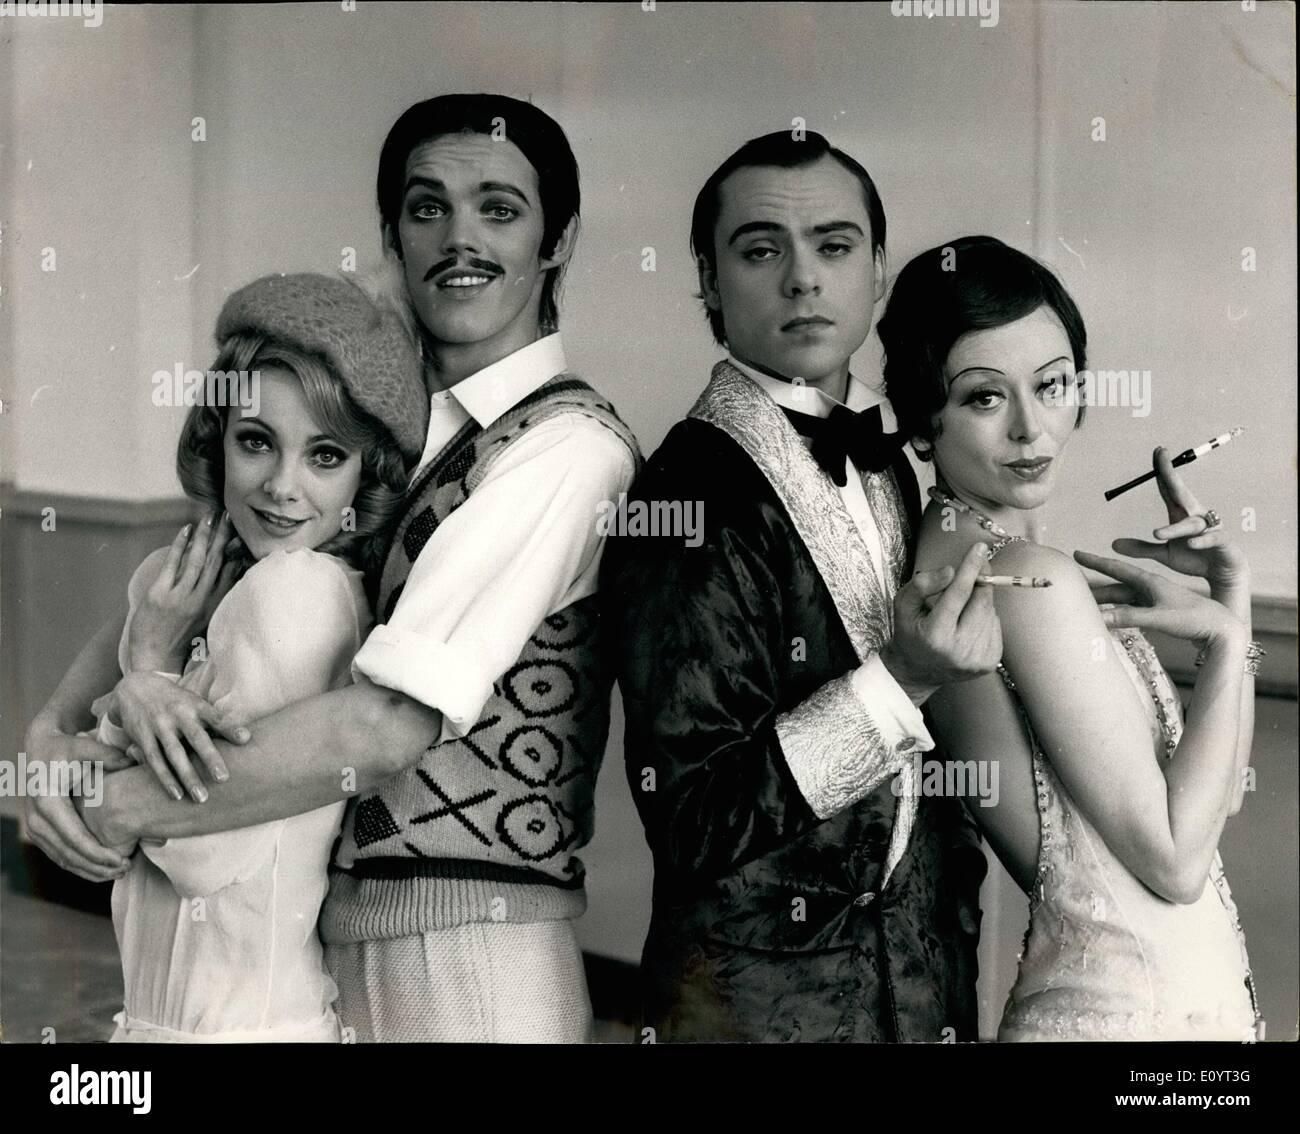 May 05, 1971 - Royal Ballet At Sadler's Wells Theater. Hollywood Heydays Reincarnated; Noel Coward Gertrude Lawrence, Douglas Fairbanks Snr., and Mary Pickford - represented by Gary Sherwood, Deidre O'Conaire, Paul Clarke and Doreen Wells respectively, leading dancers of the Royal Ballet appropriately made-up and costumed - were at today's Photocall at Sadler's Wells Theater Stock Photo